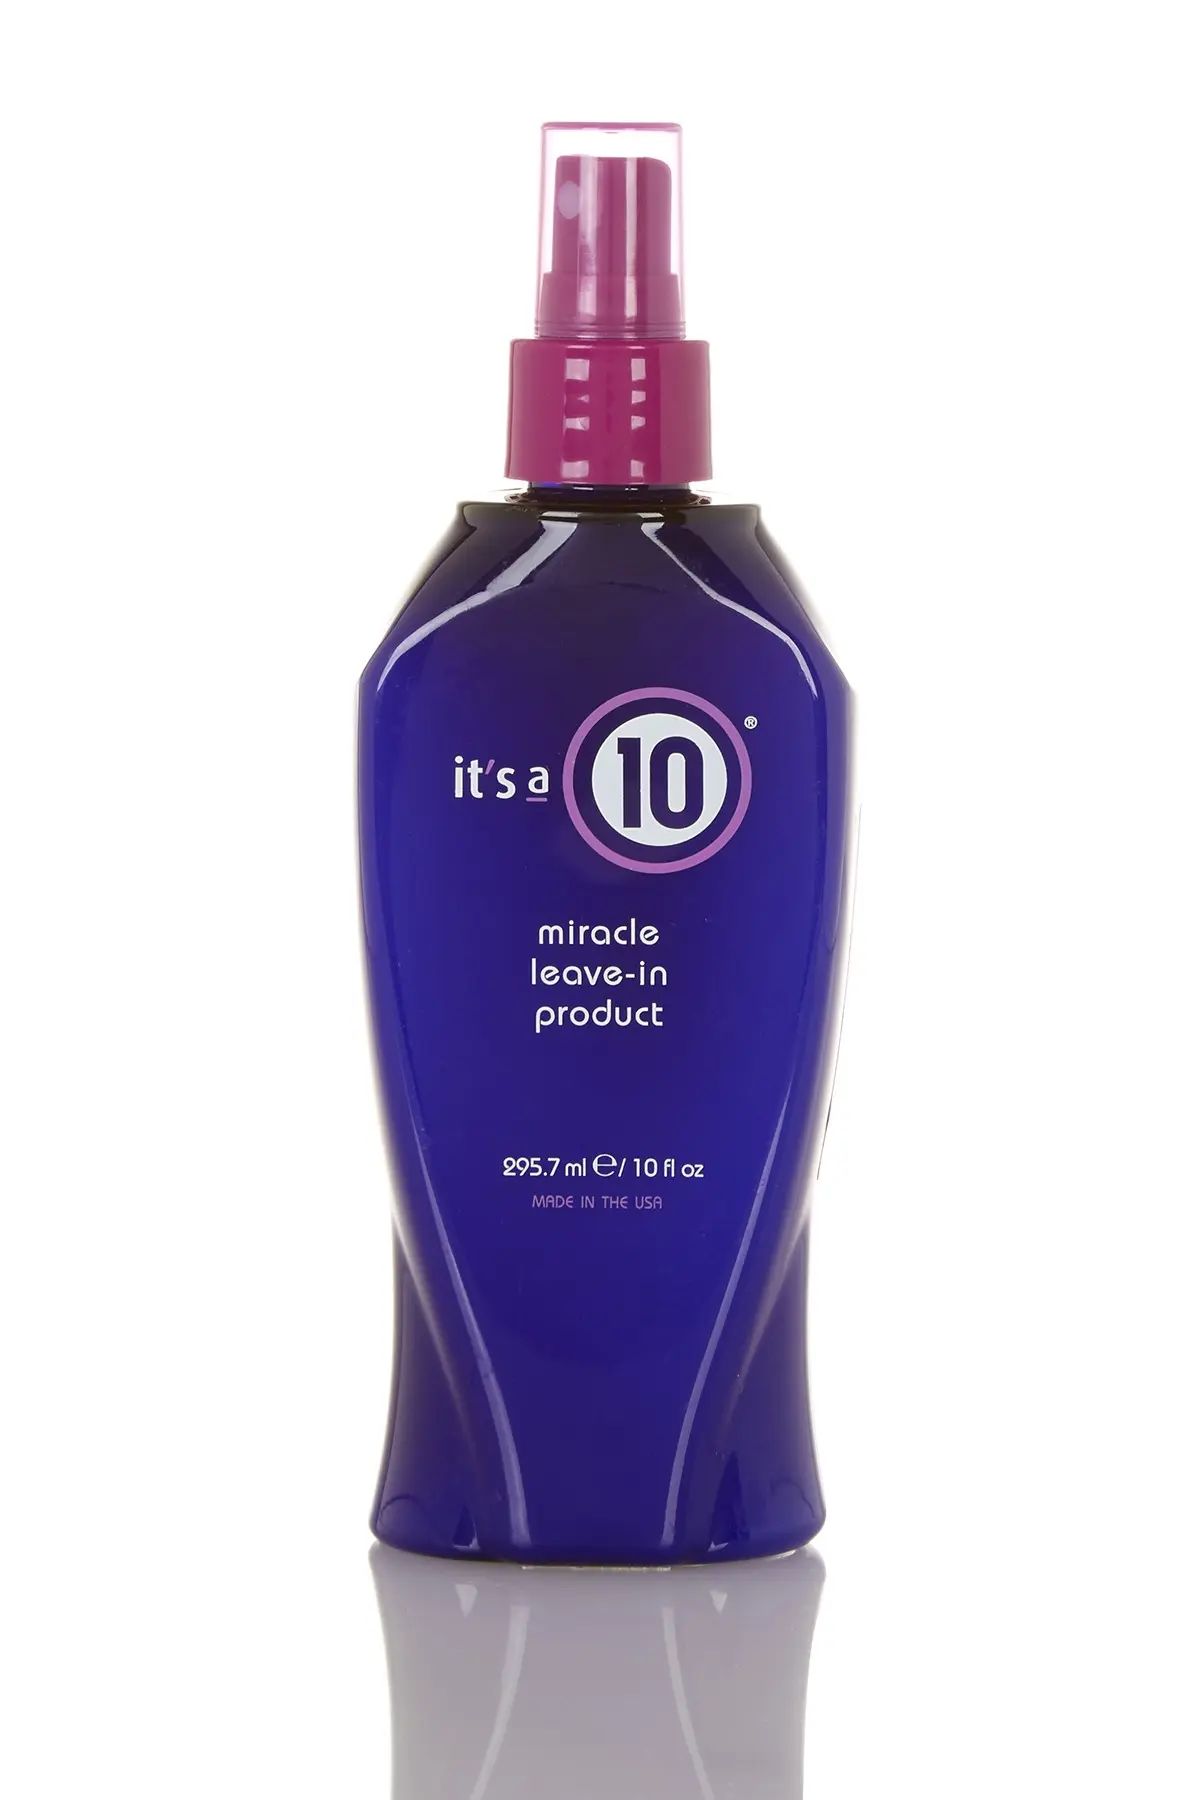 ITS A 10 Leave-In Conditioner - 10 oz. at Nordstrom Rack | Hautelook